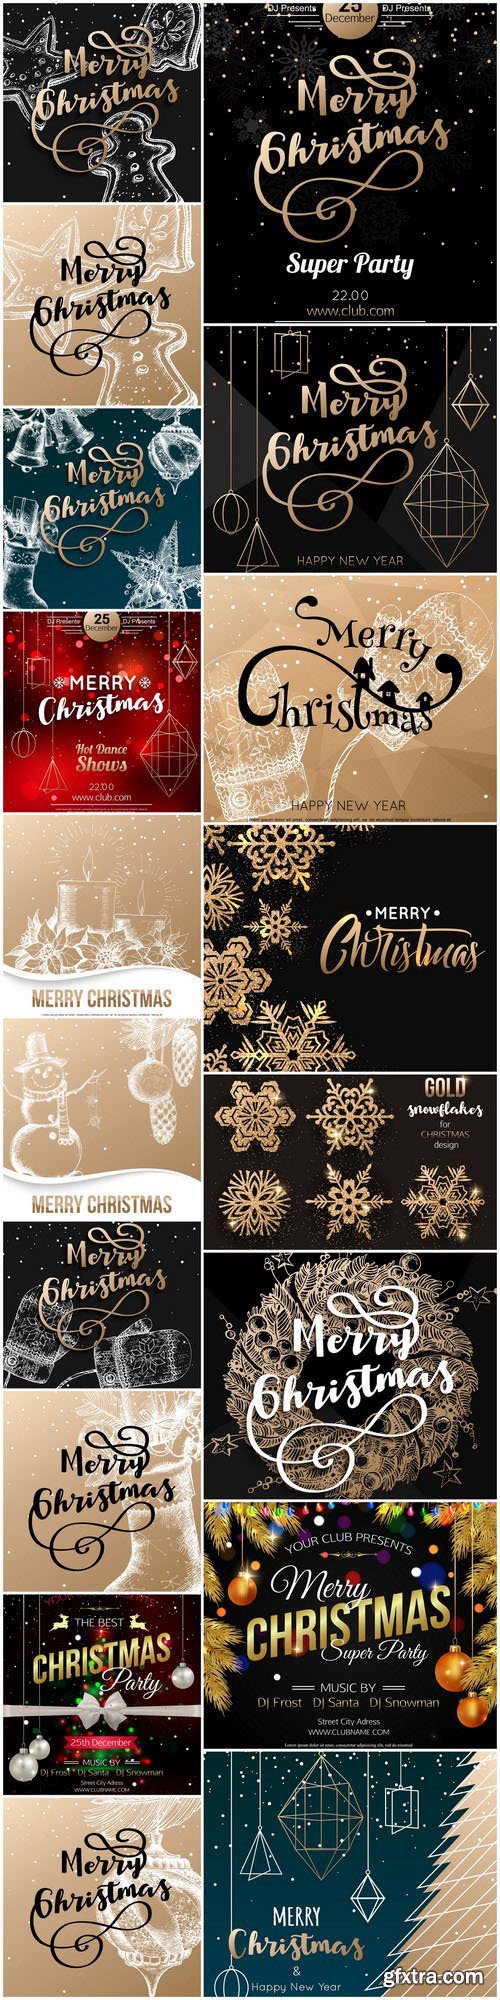 New Year 2017 & Christmas Design 20 - 18xEPS